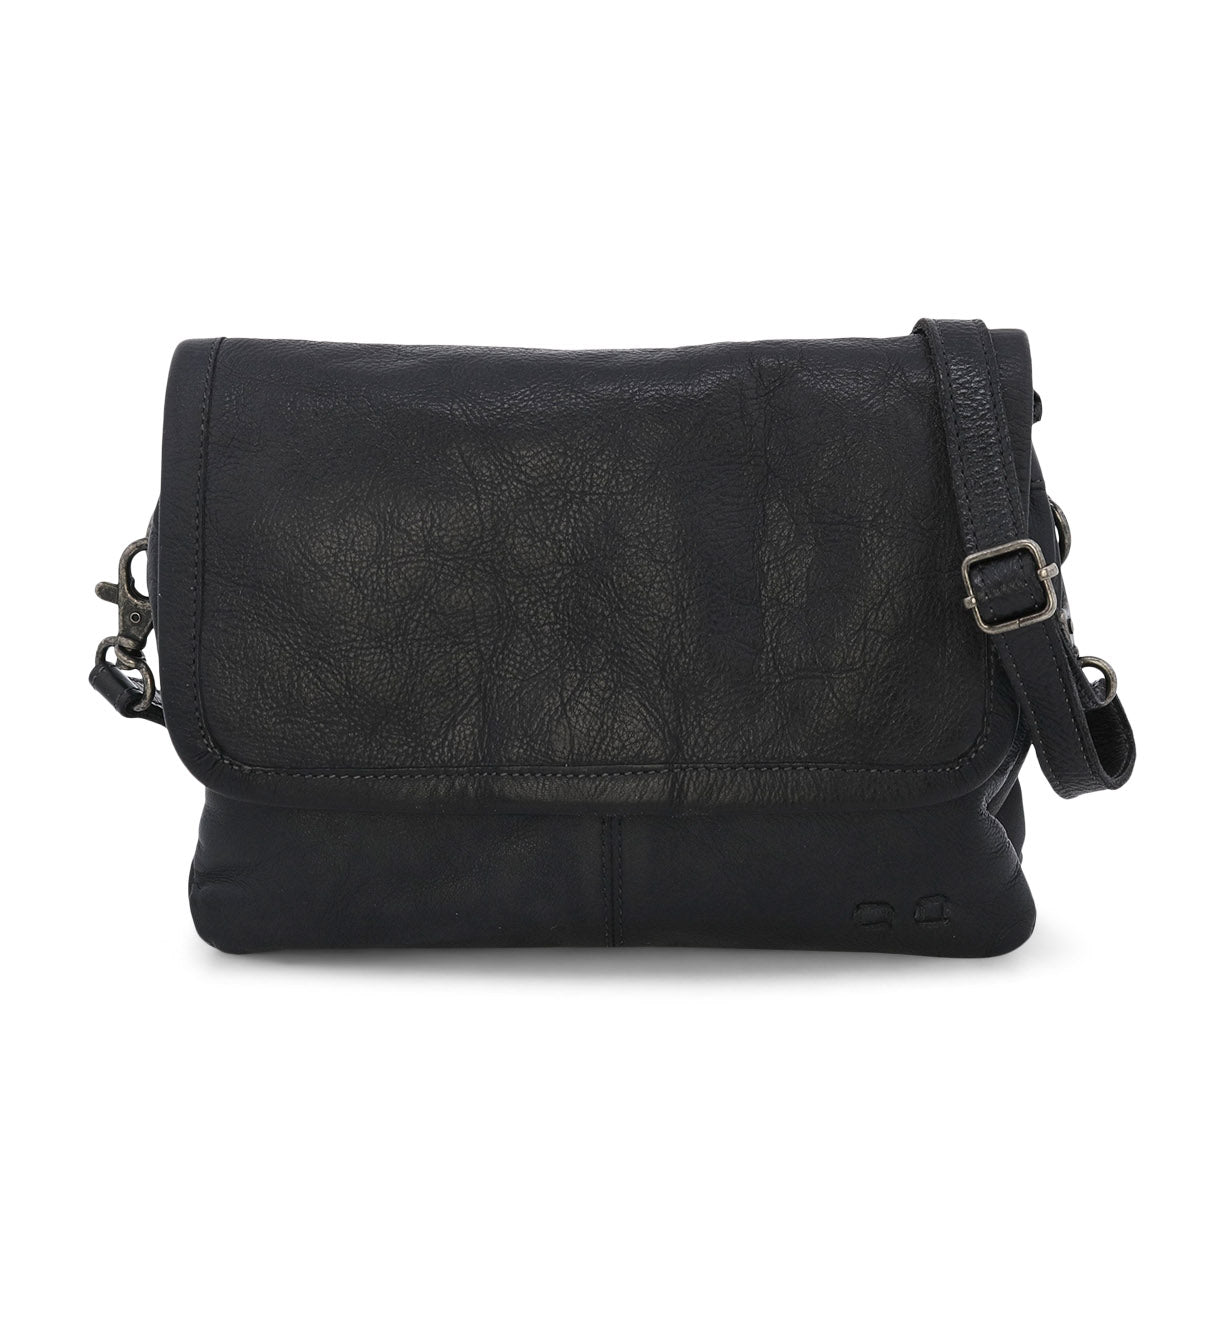 A black leather Ziggy cross body bag with an adjustable strap from Bed Stu.